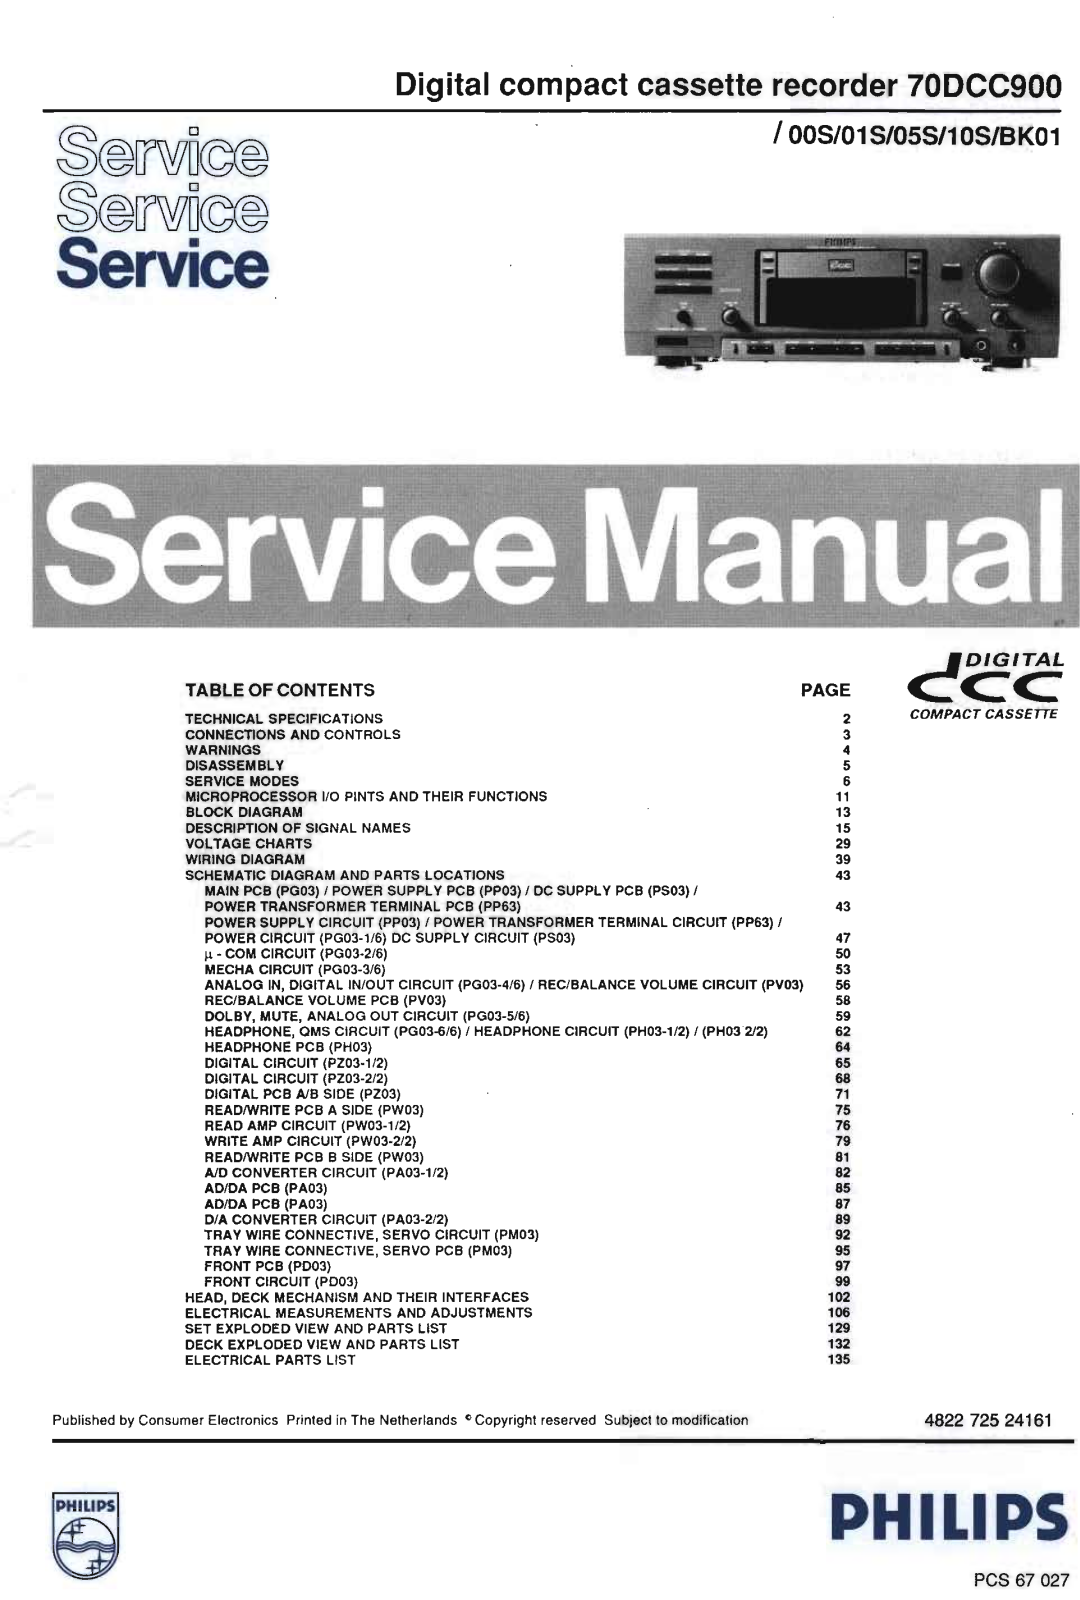 Philips DCC-900 Service Manual